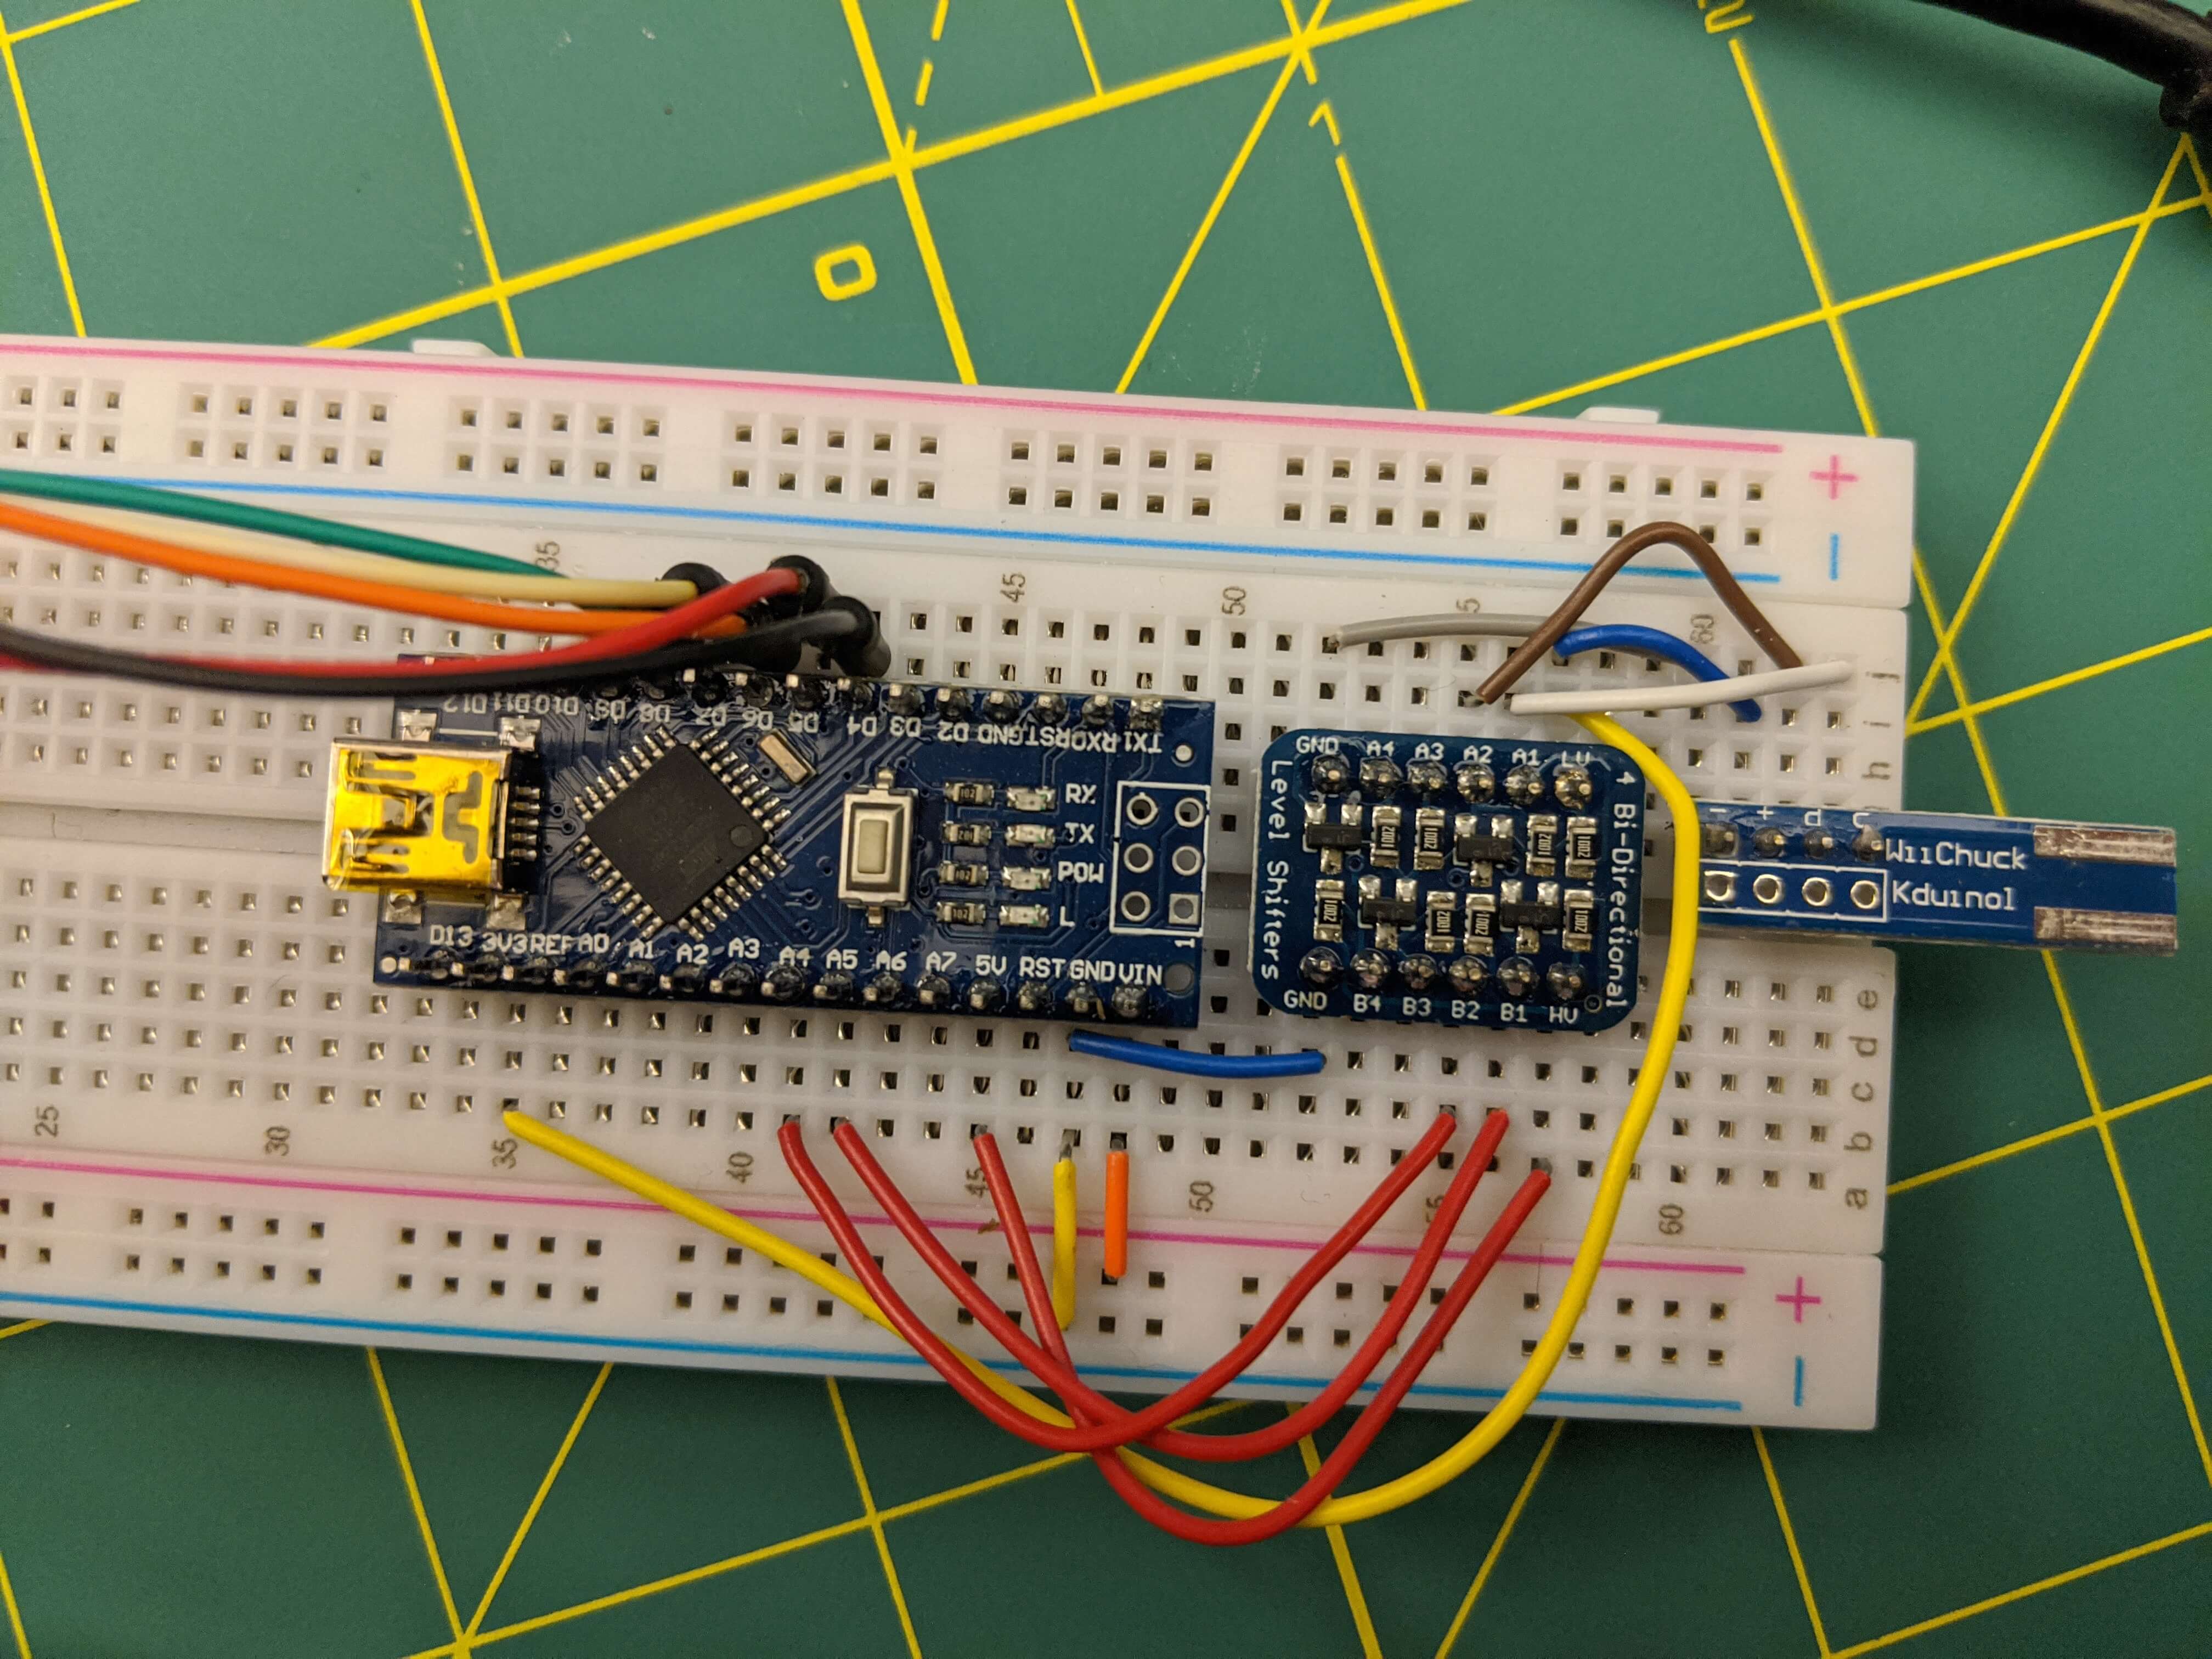 Wires connected between the WiiChuck adapter and Arduino Nano